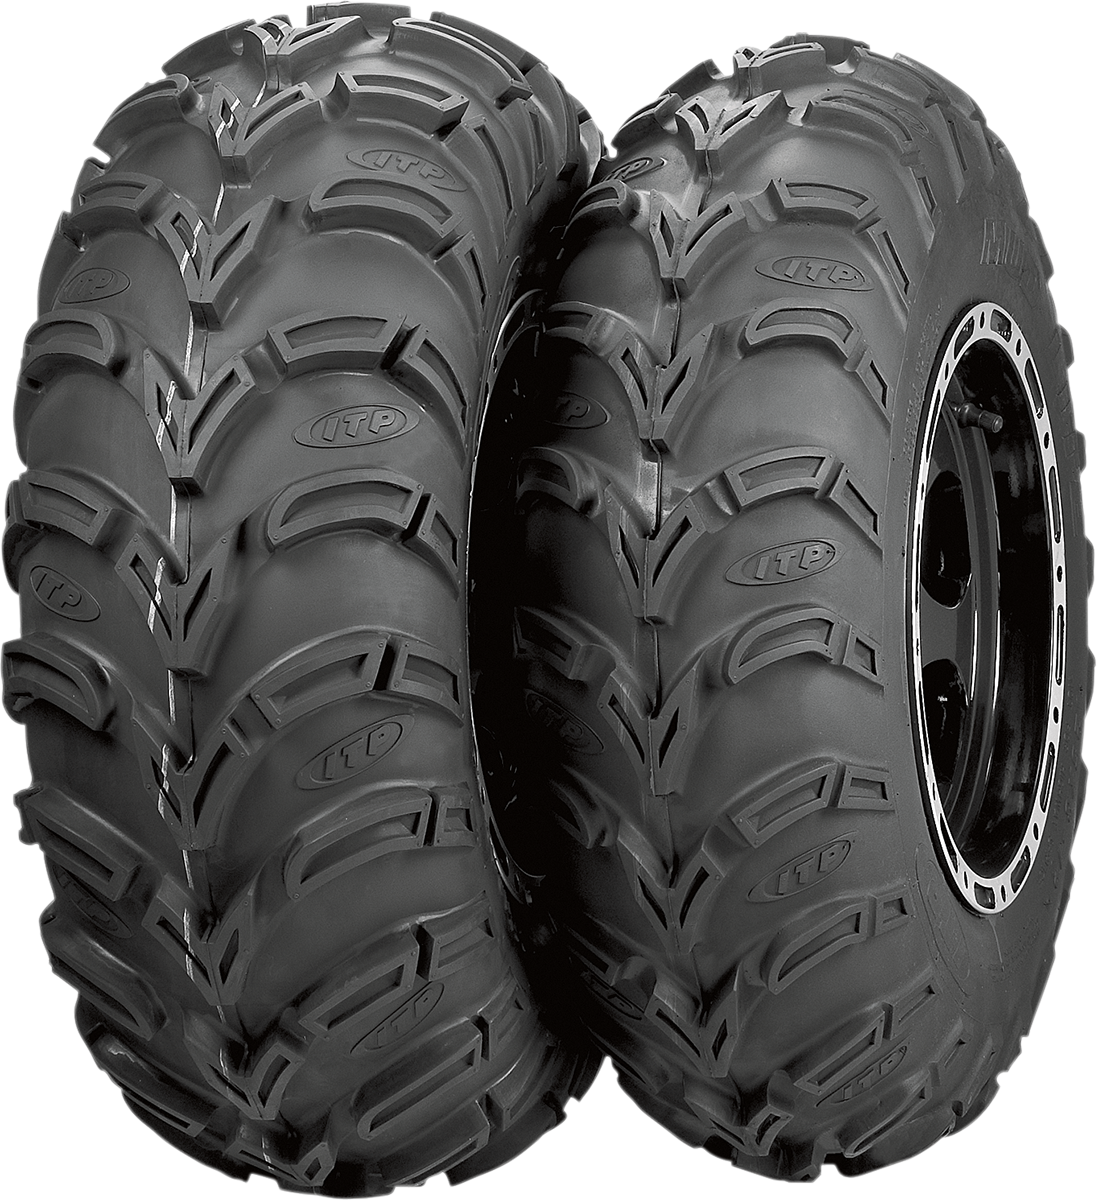 ITP Tire - Mud Lite XL - Front/Rear - 27x12-12 - 6 Ply 56A347